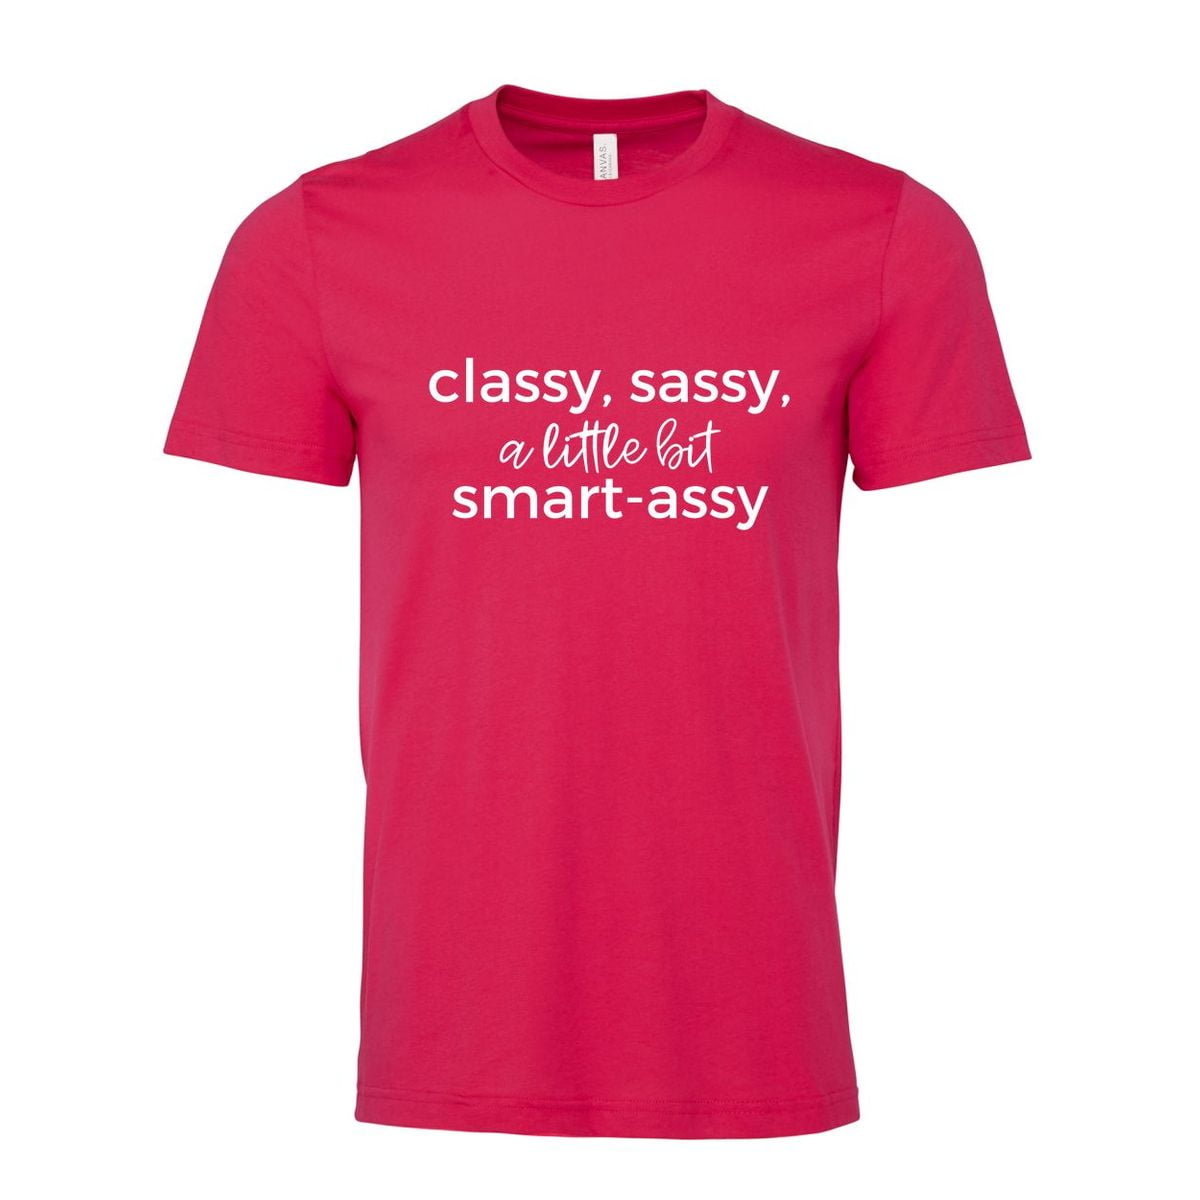 Sassy Classy Tee Funny Gift Funny Shirt Classy Sassy And A Bit Smart Assy Womens Shirt with Saying Sarcastic Shirt